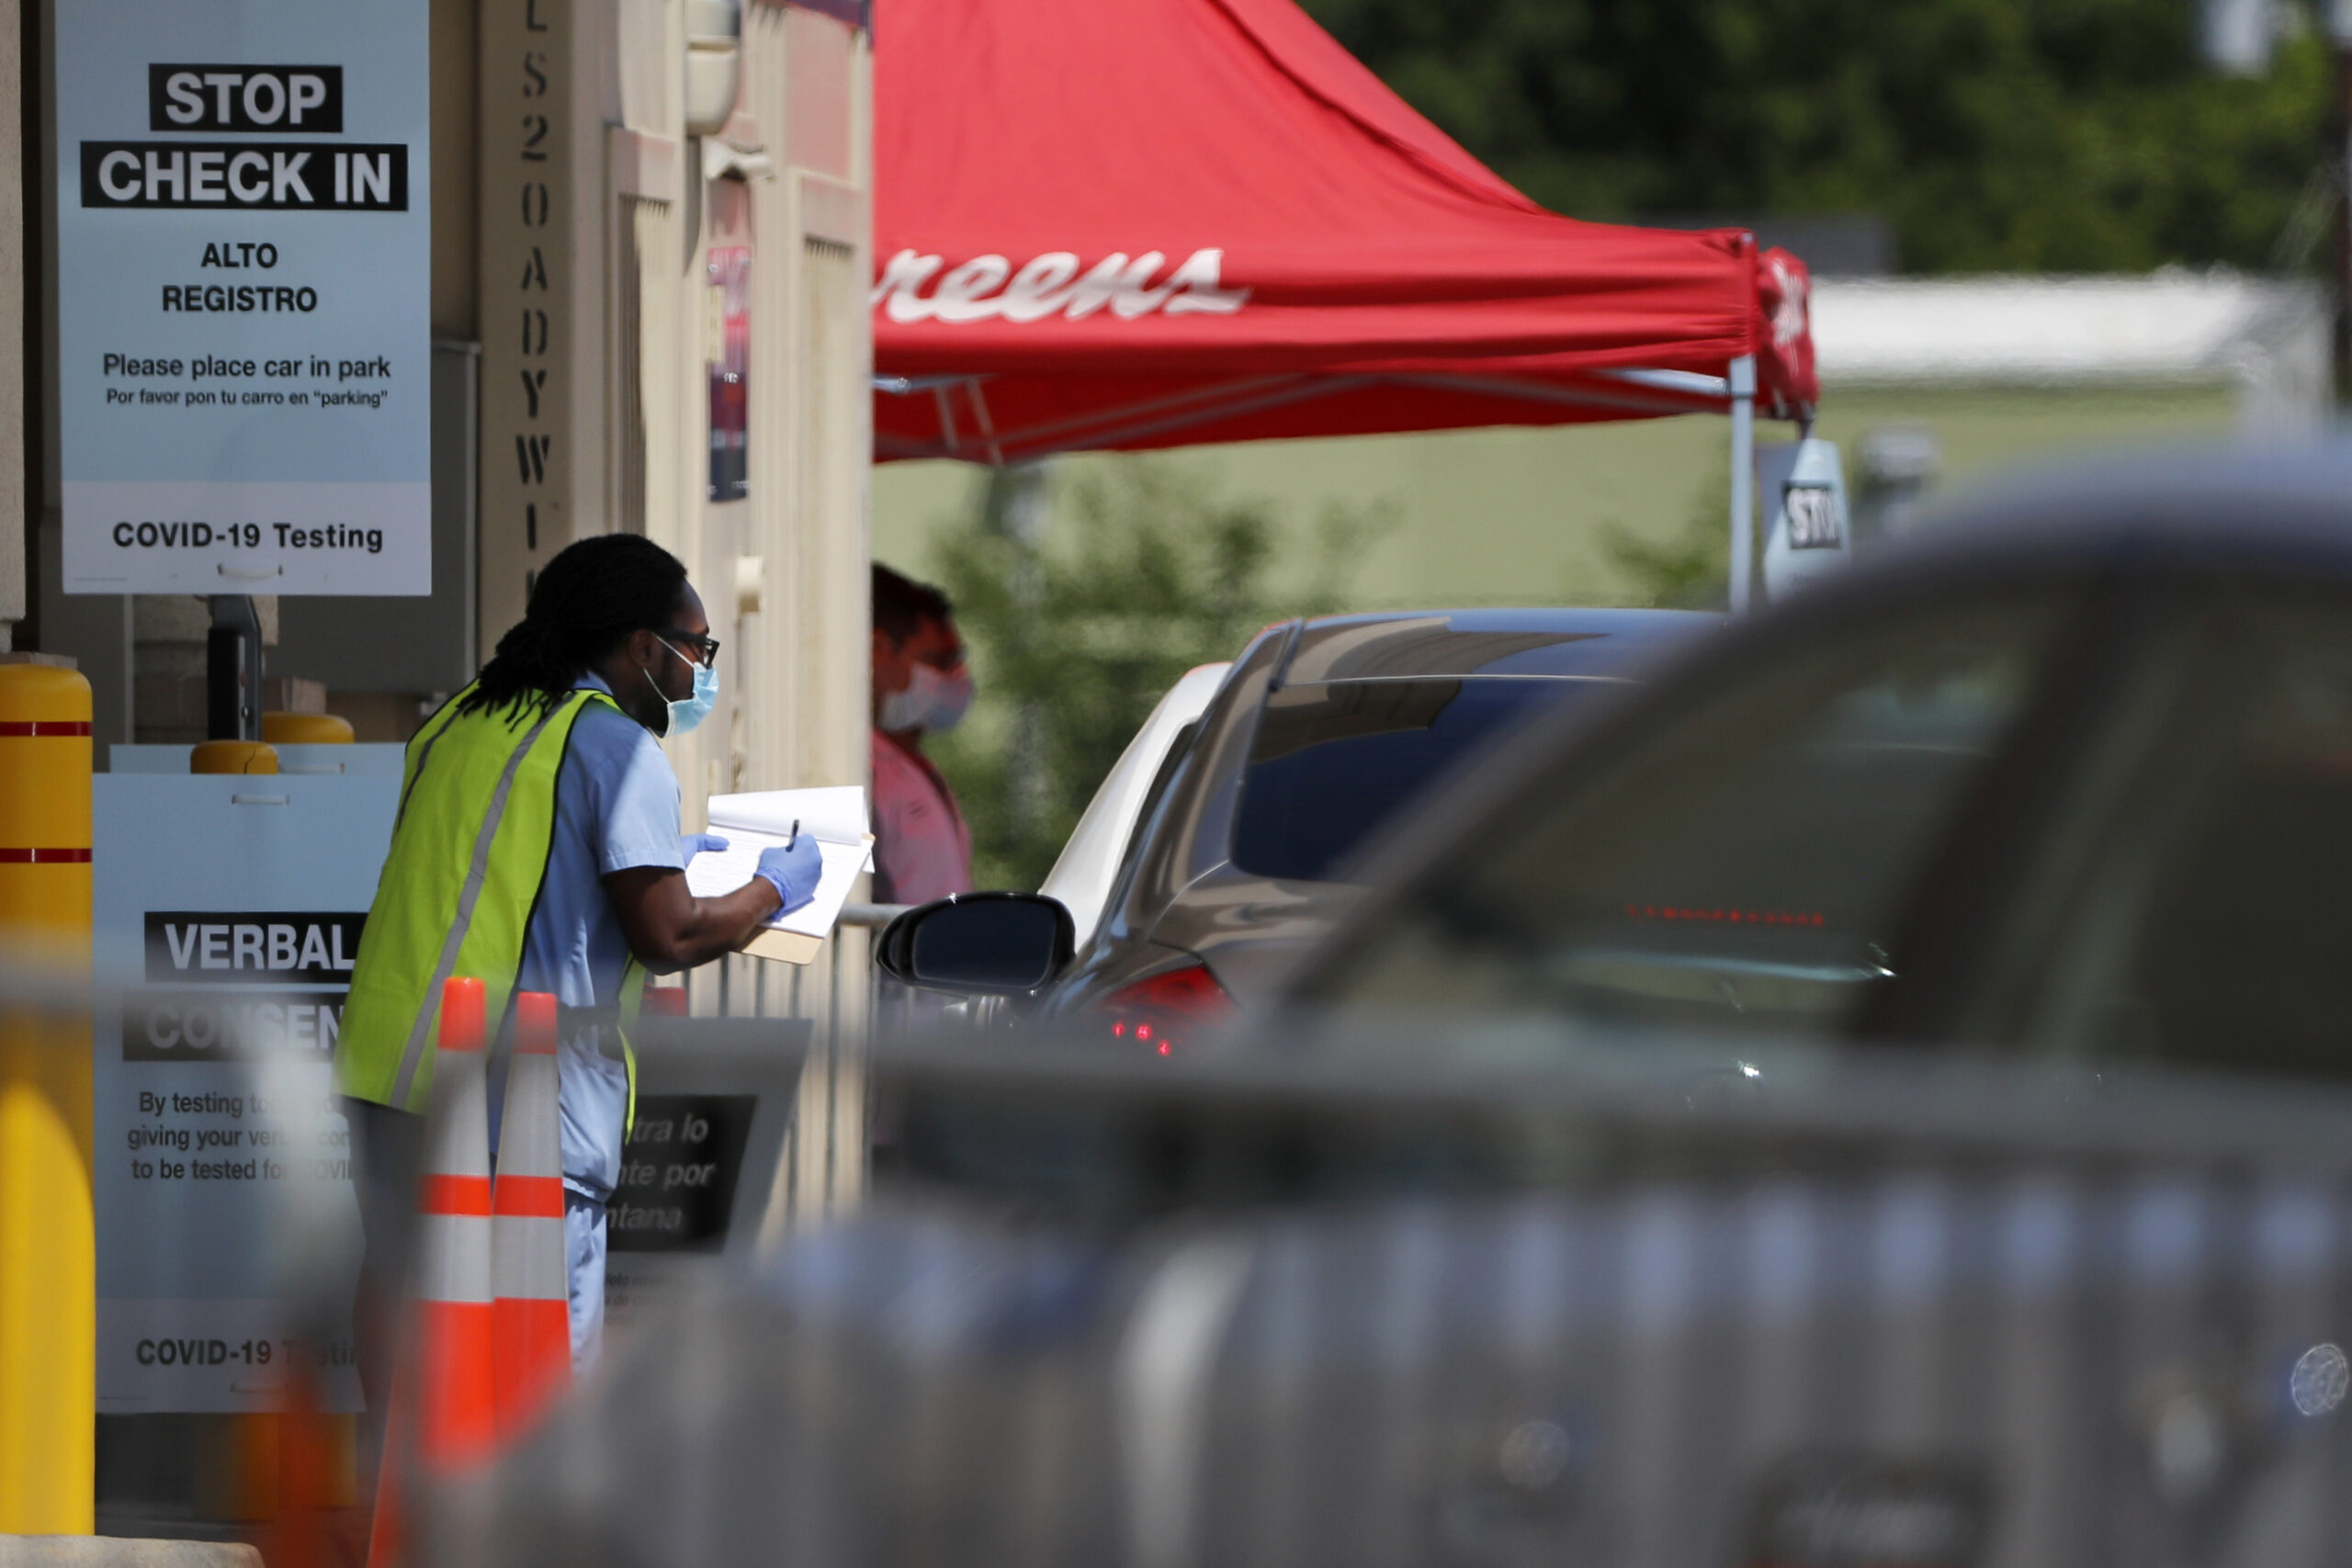 A slow but consistent flow of vehicles line up in a drive-thru area as a Walgreens pharmacist assists them with COVID-19 testing